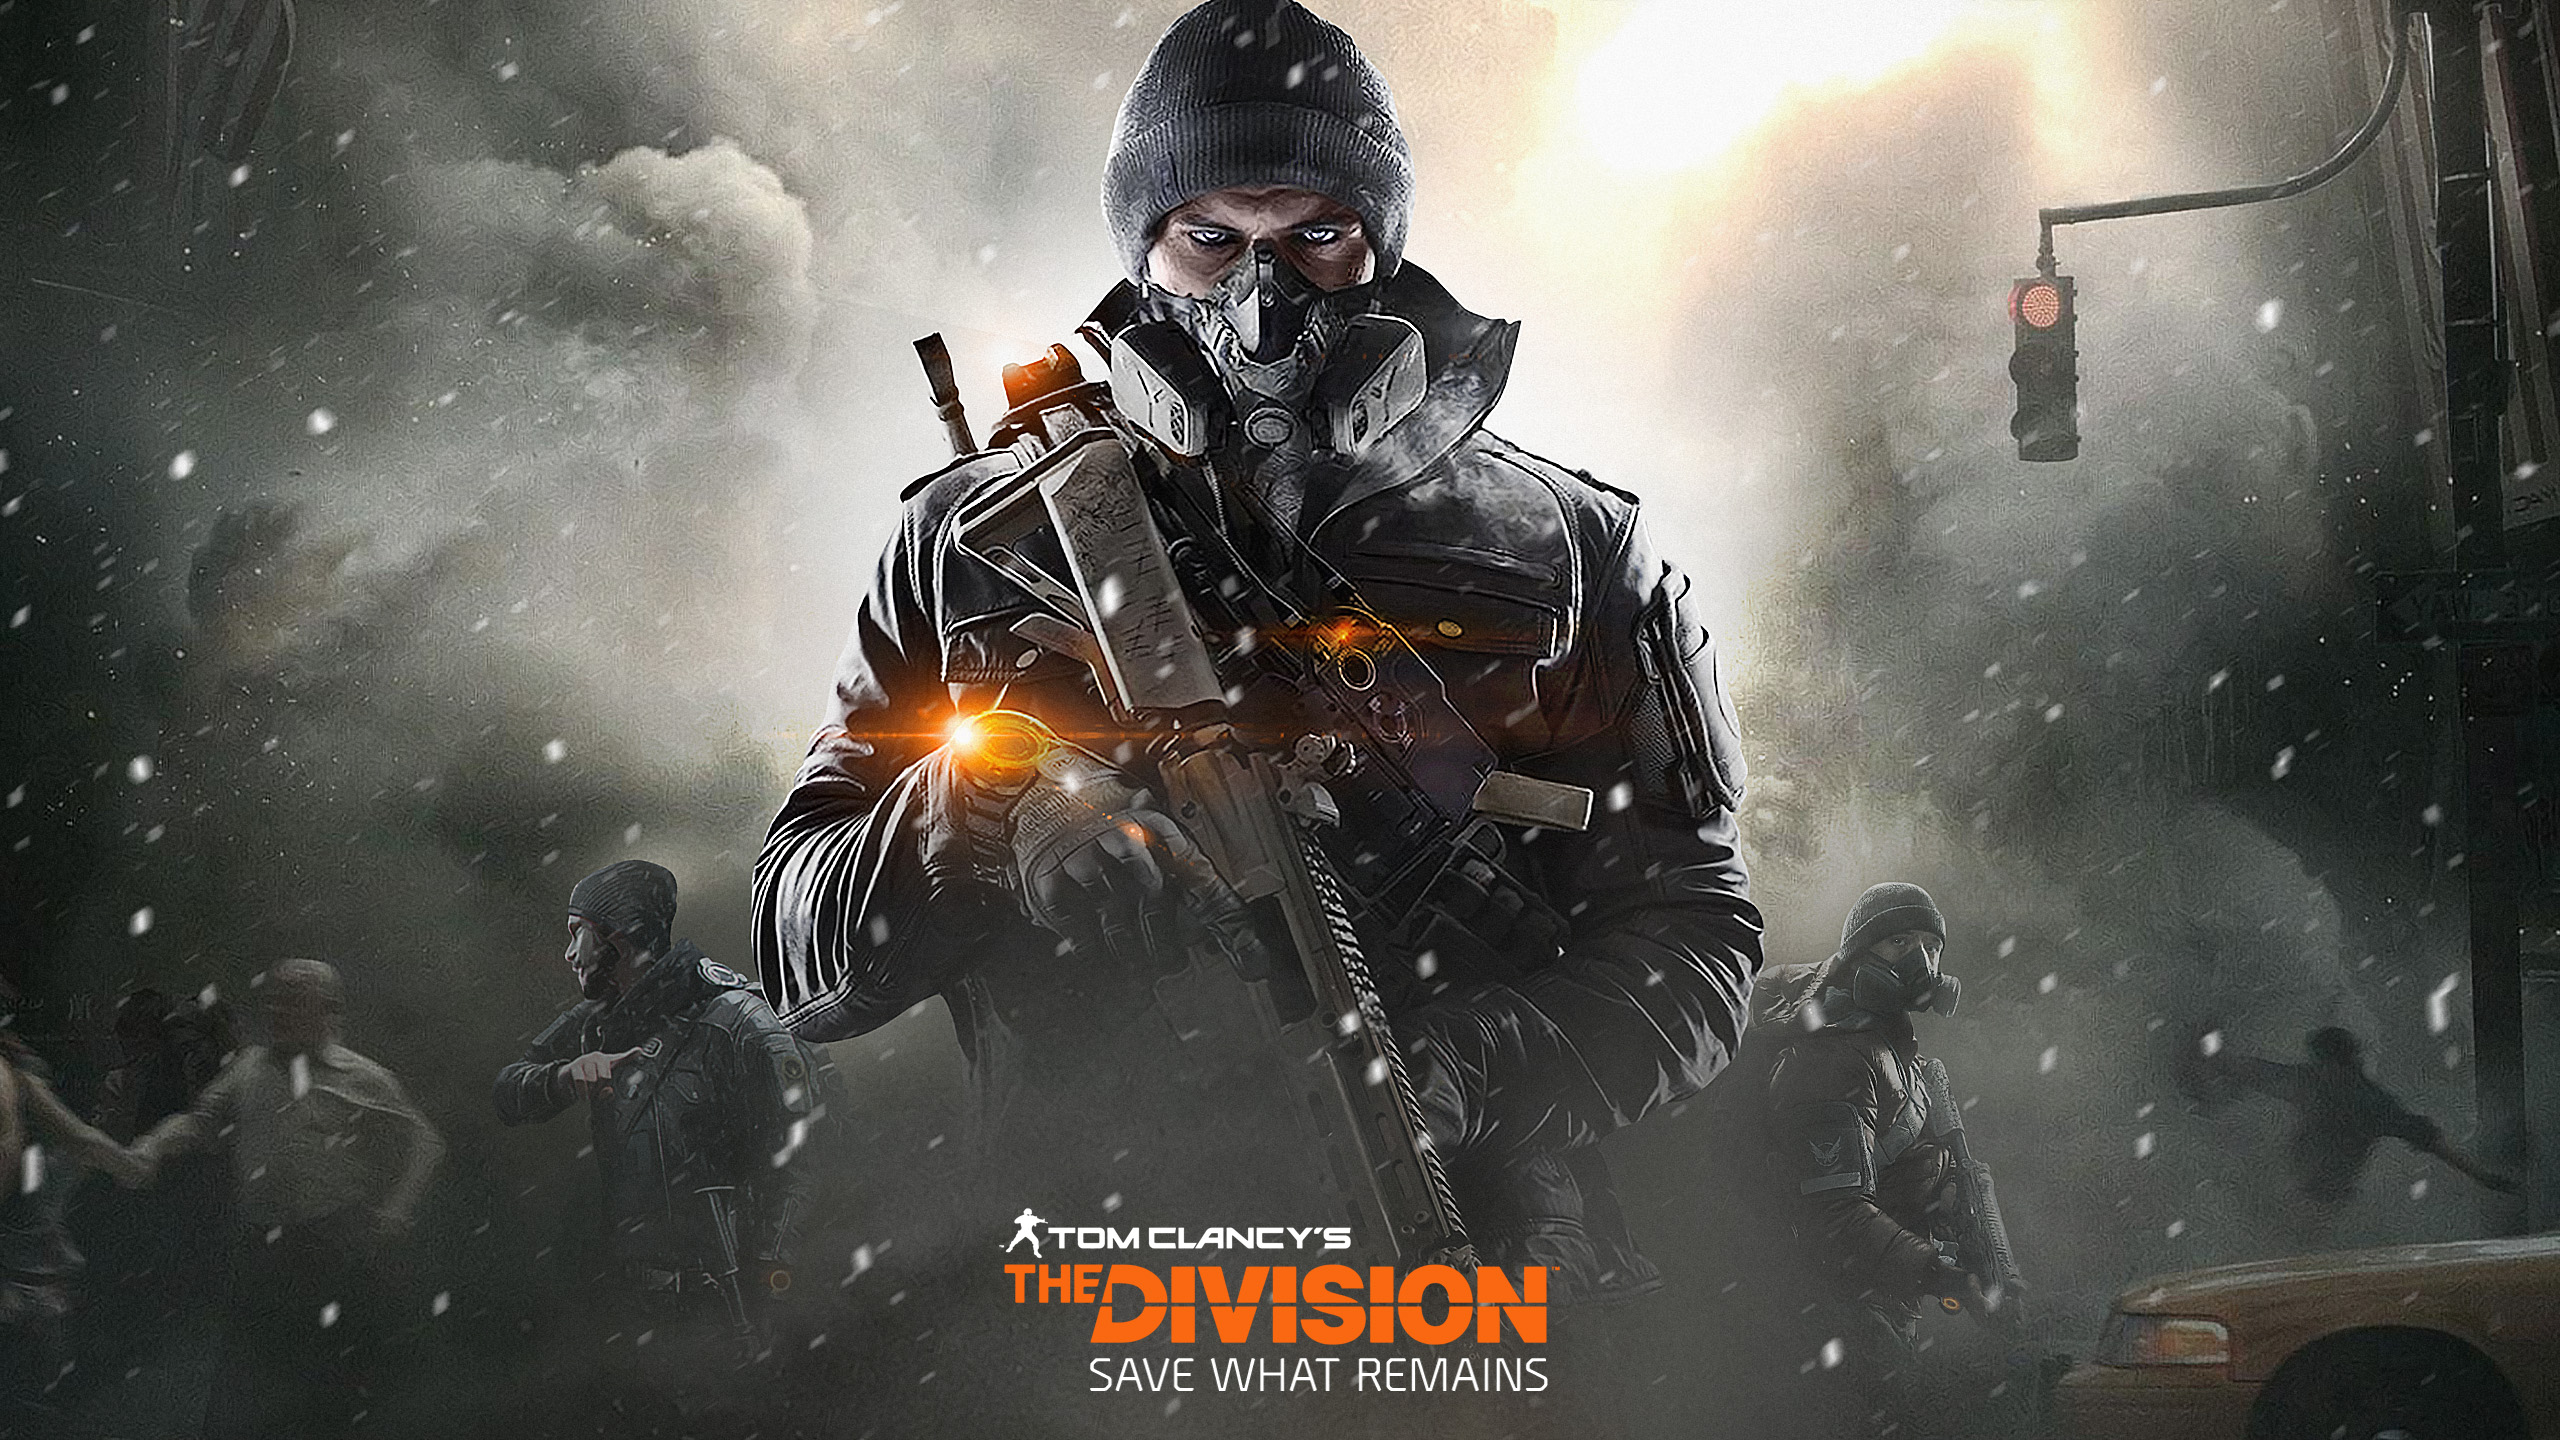 The Division HD Wallpaper Clancy's The Division Wallpaper